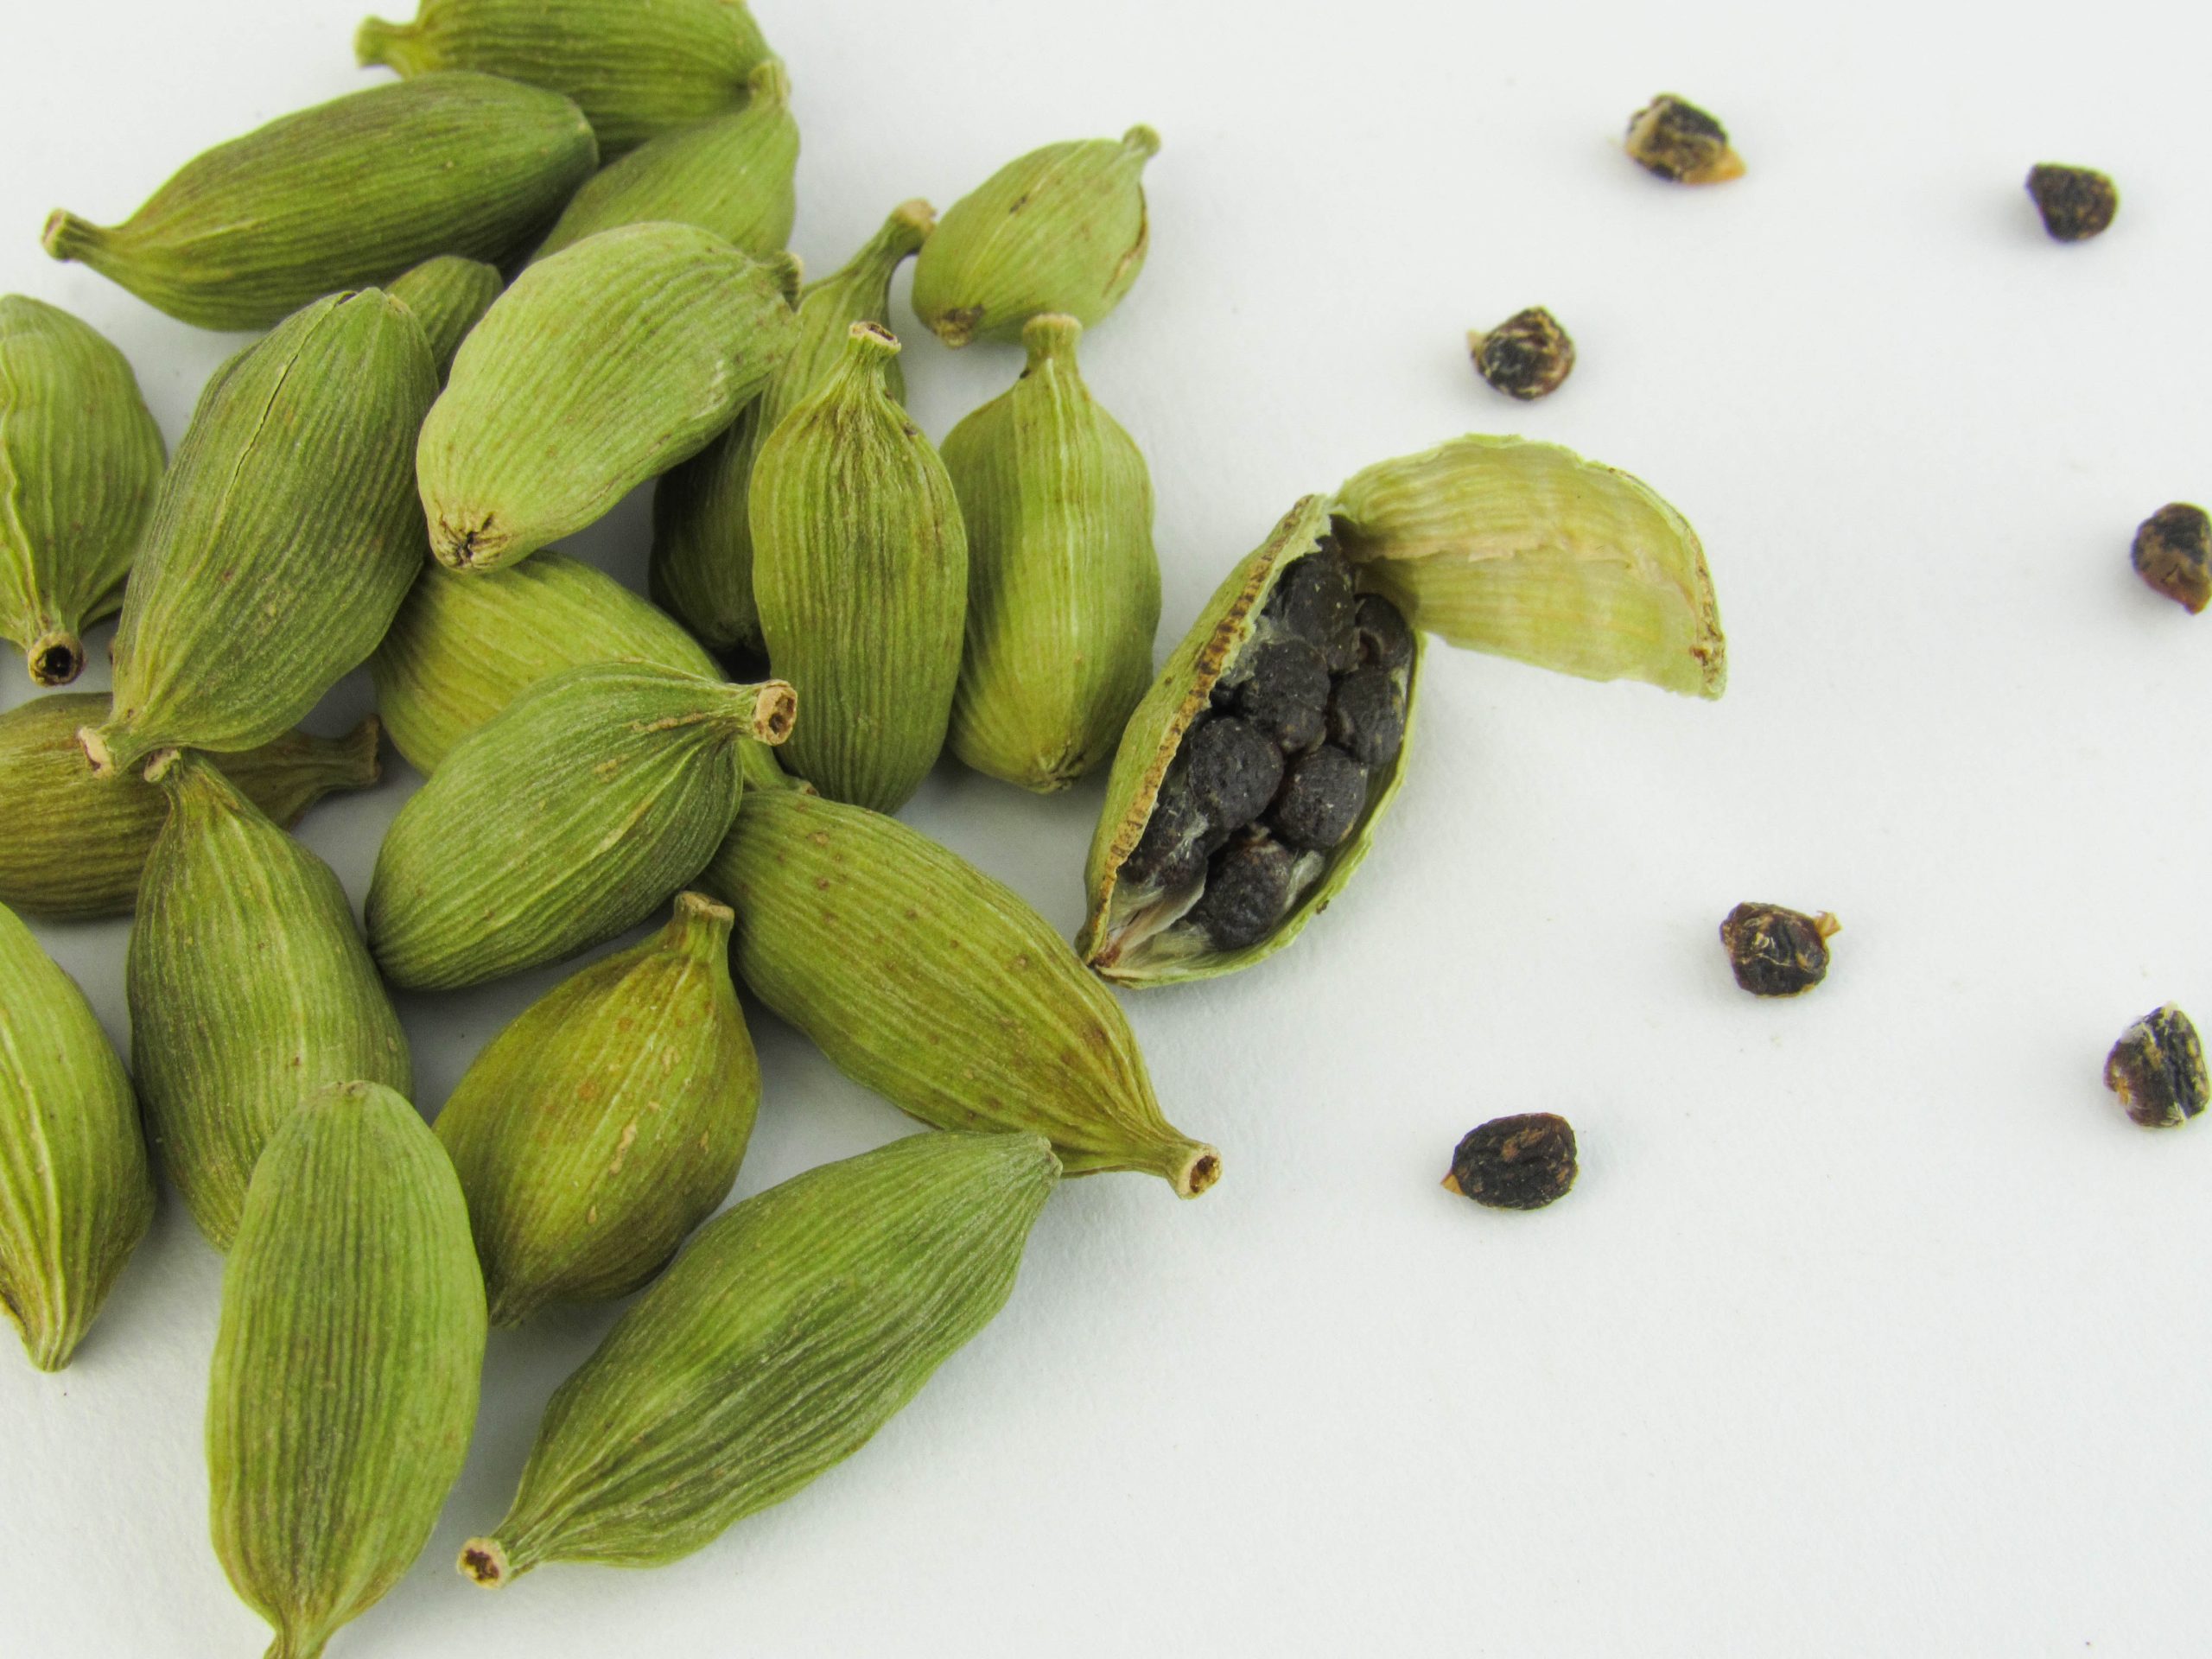 Cardamom Cultivation and farming in india